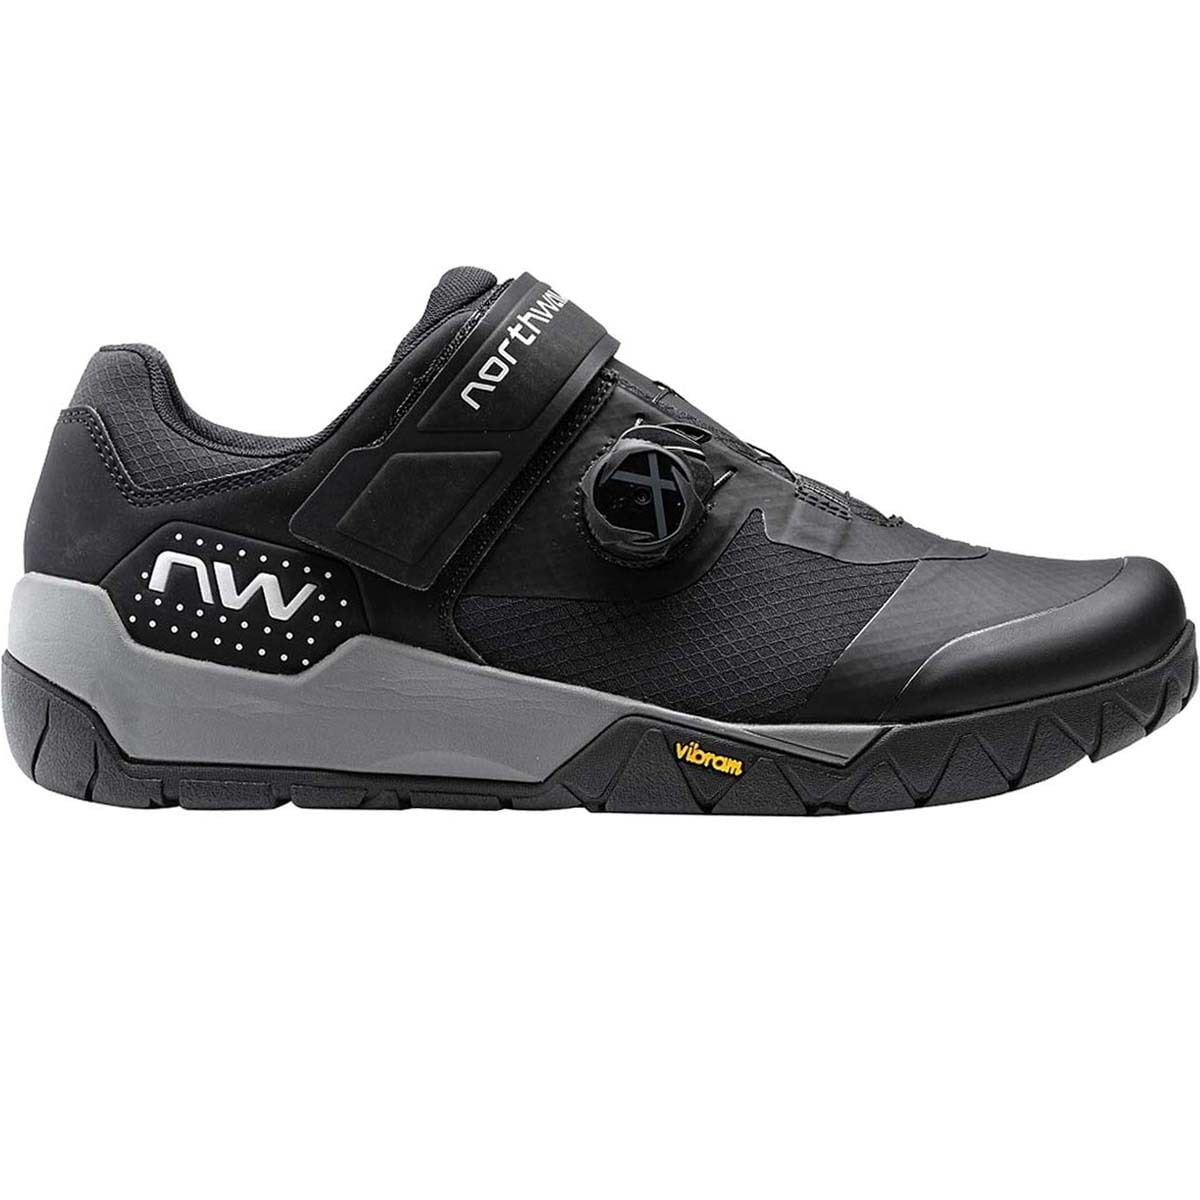 Northwave Overland Plus Cycling Shoe - Men's